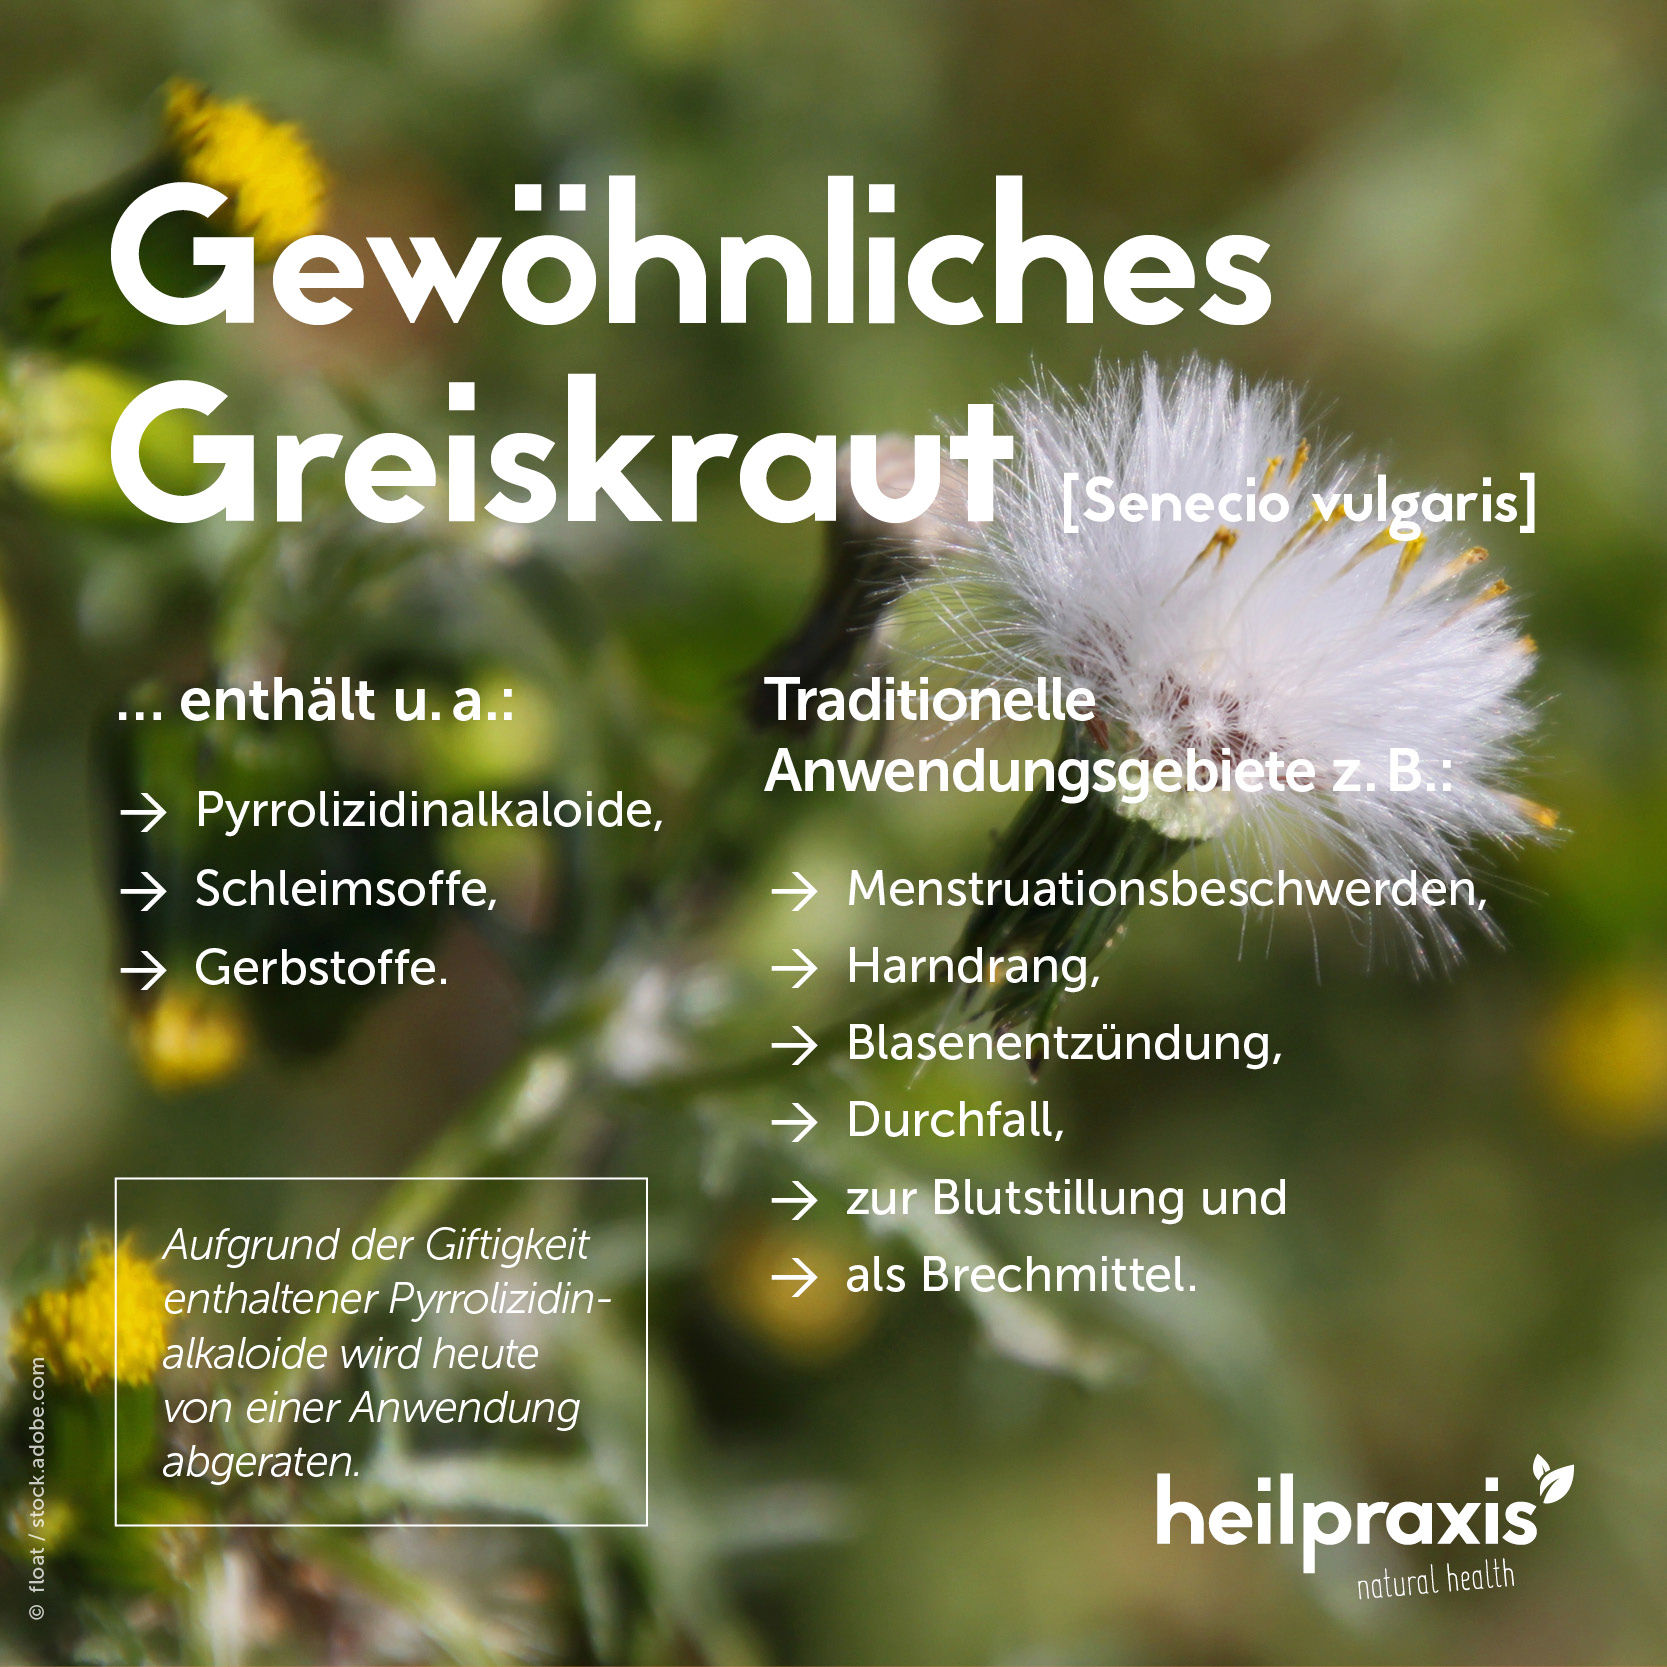 Overview graphic of the ingredients and application of common groundsel